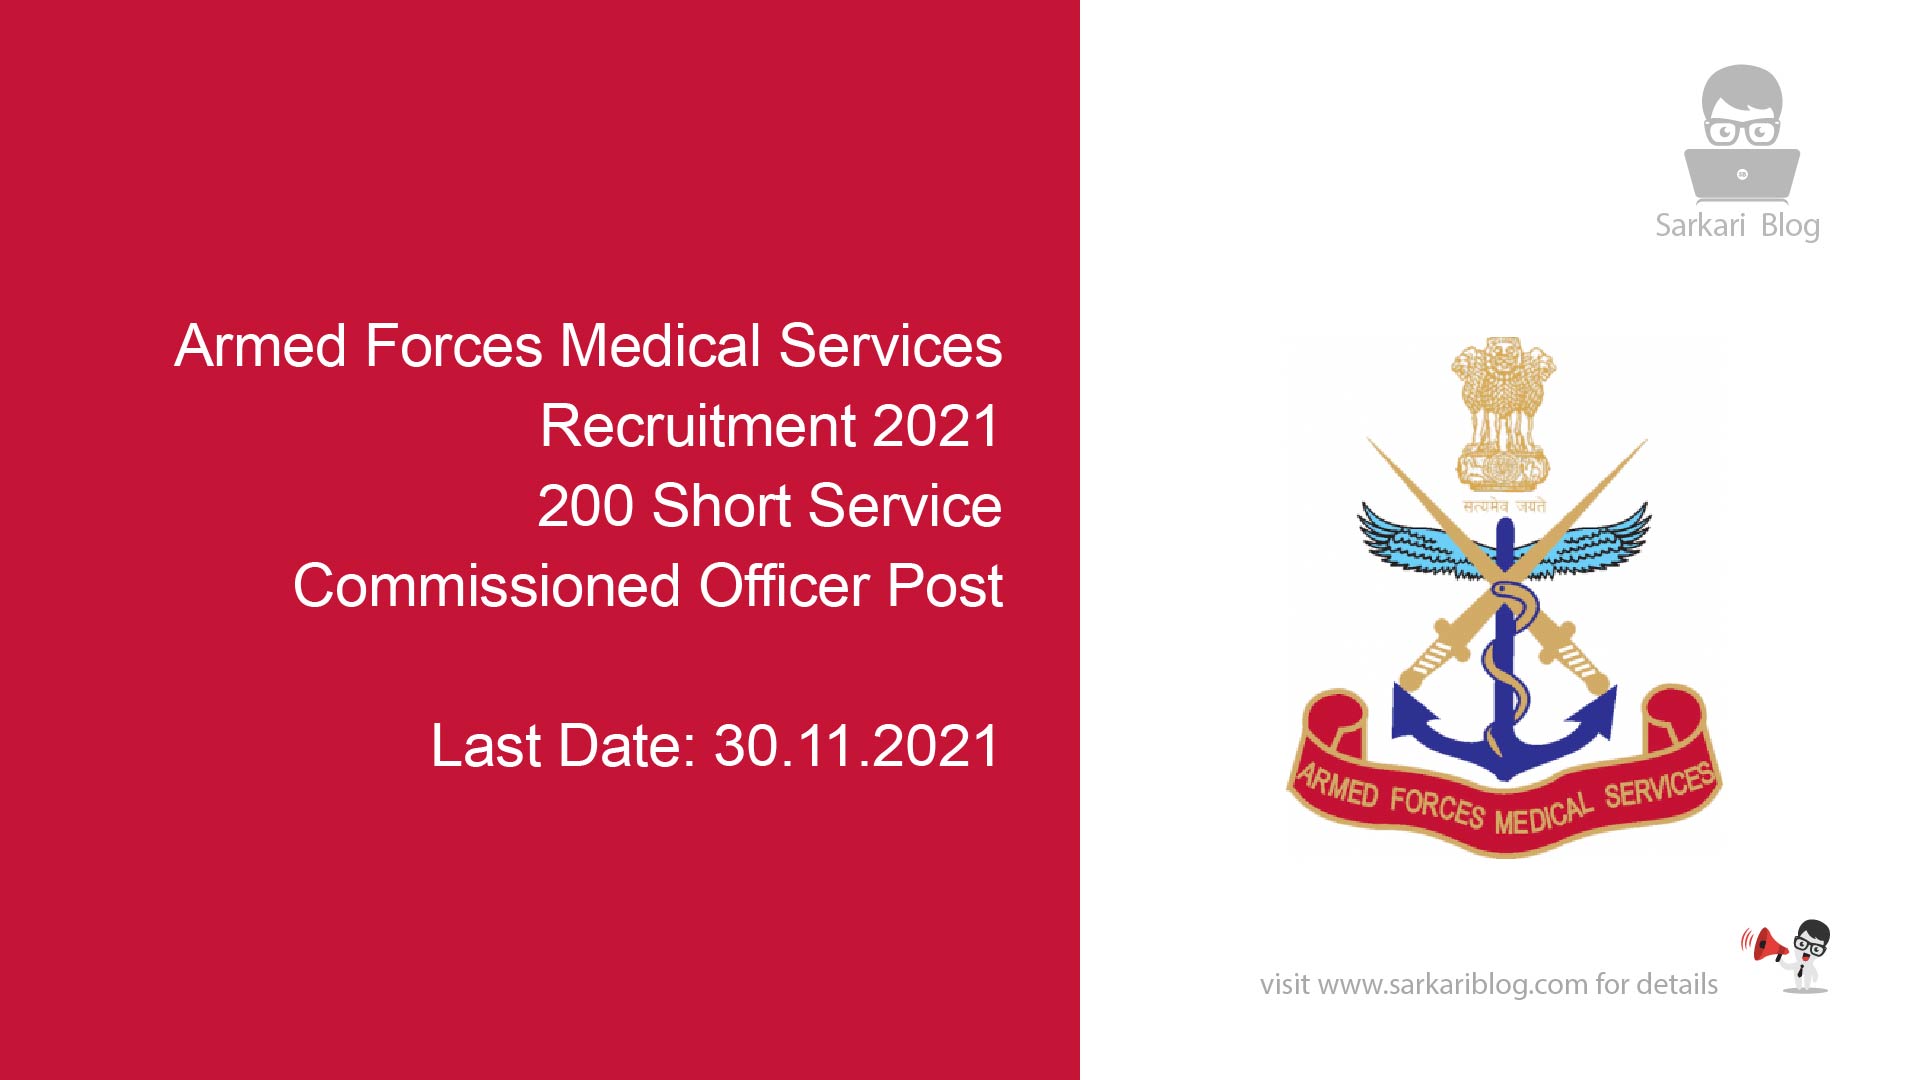 Armed Forces Medical Services Recruitment 2021